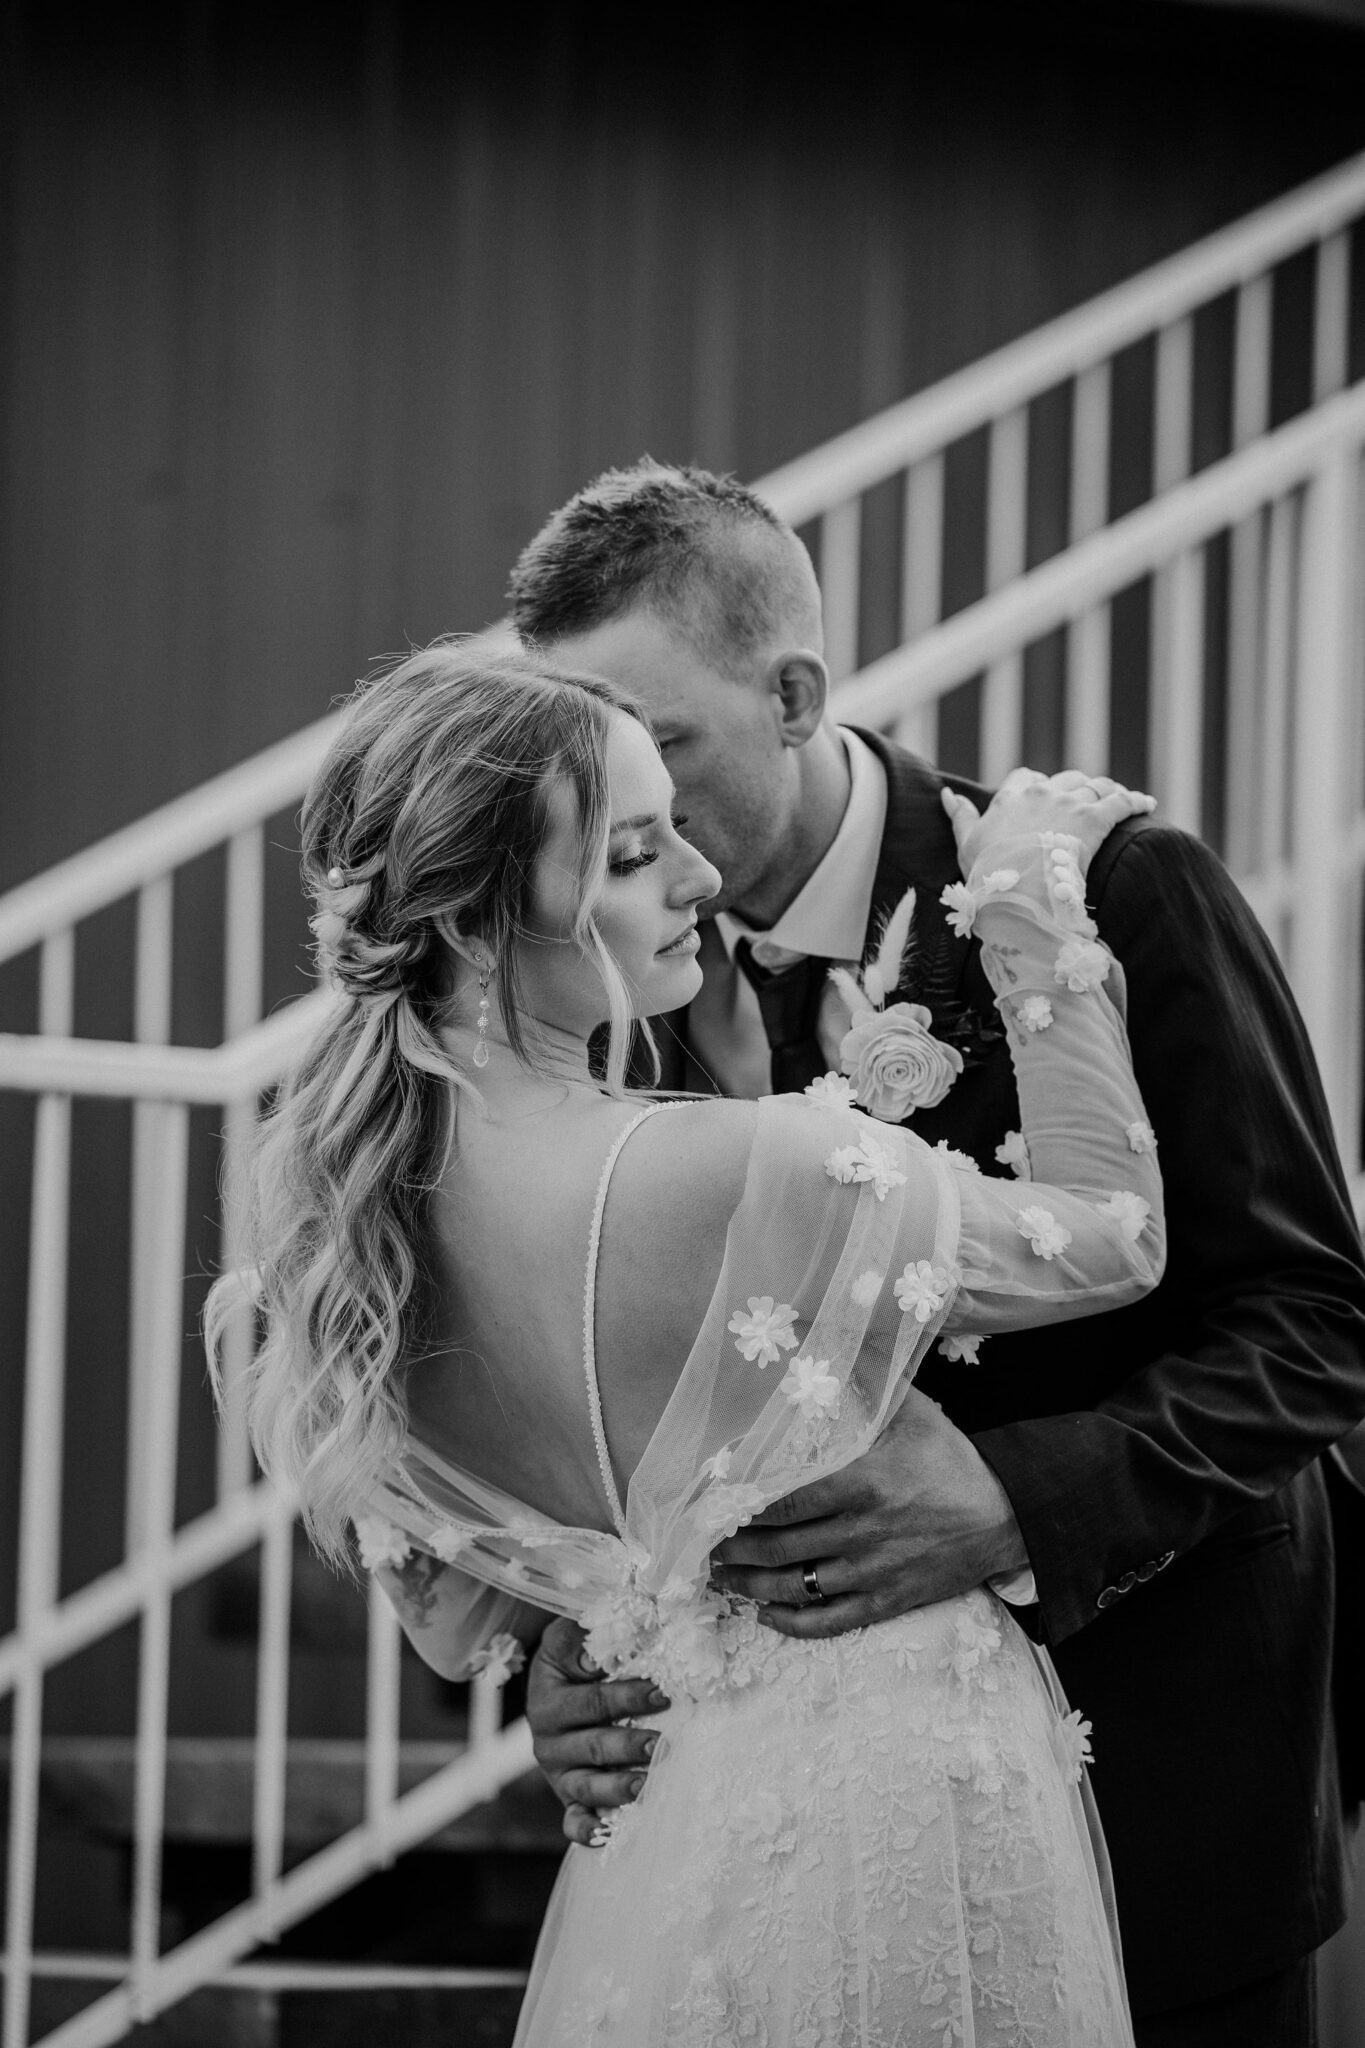 Black and white portrait of bride and groom embracing at 52 North Venue, featuring bride's floral-detailed tule gown and elegant ponytail updo, warm and moody wedding inspiration. 